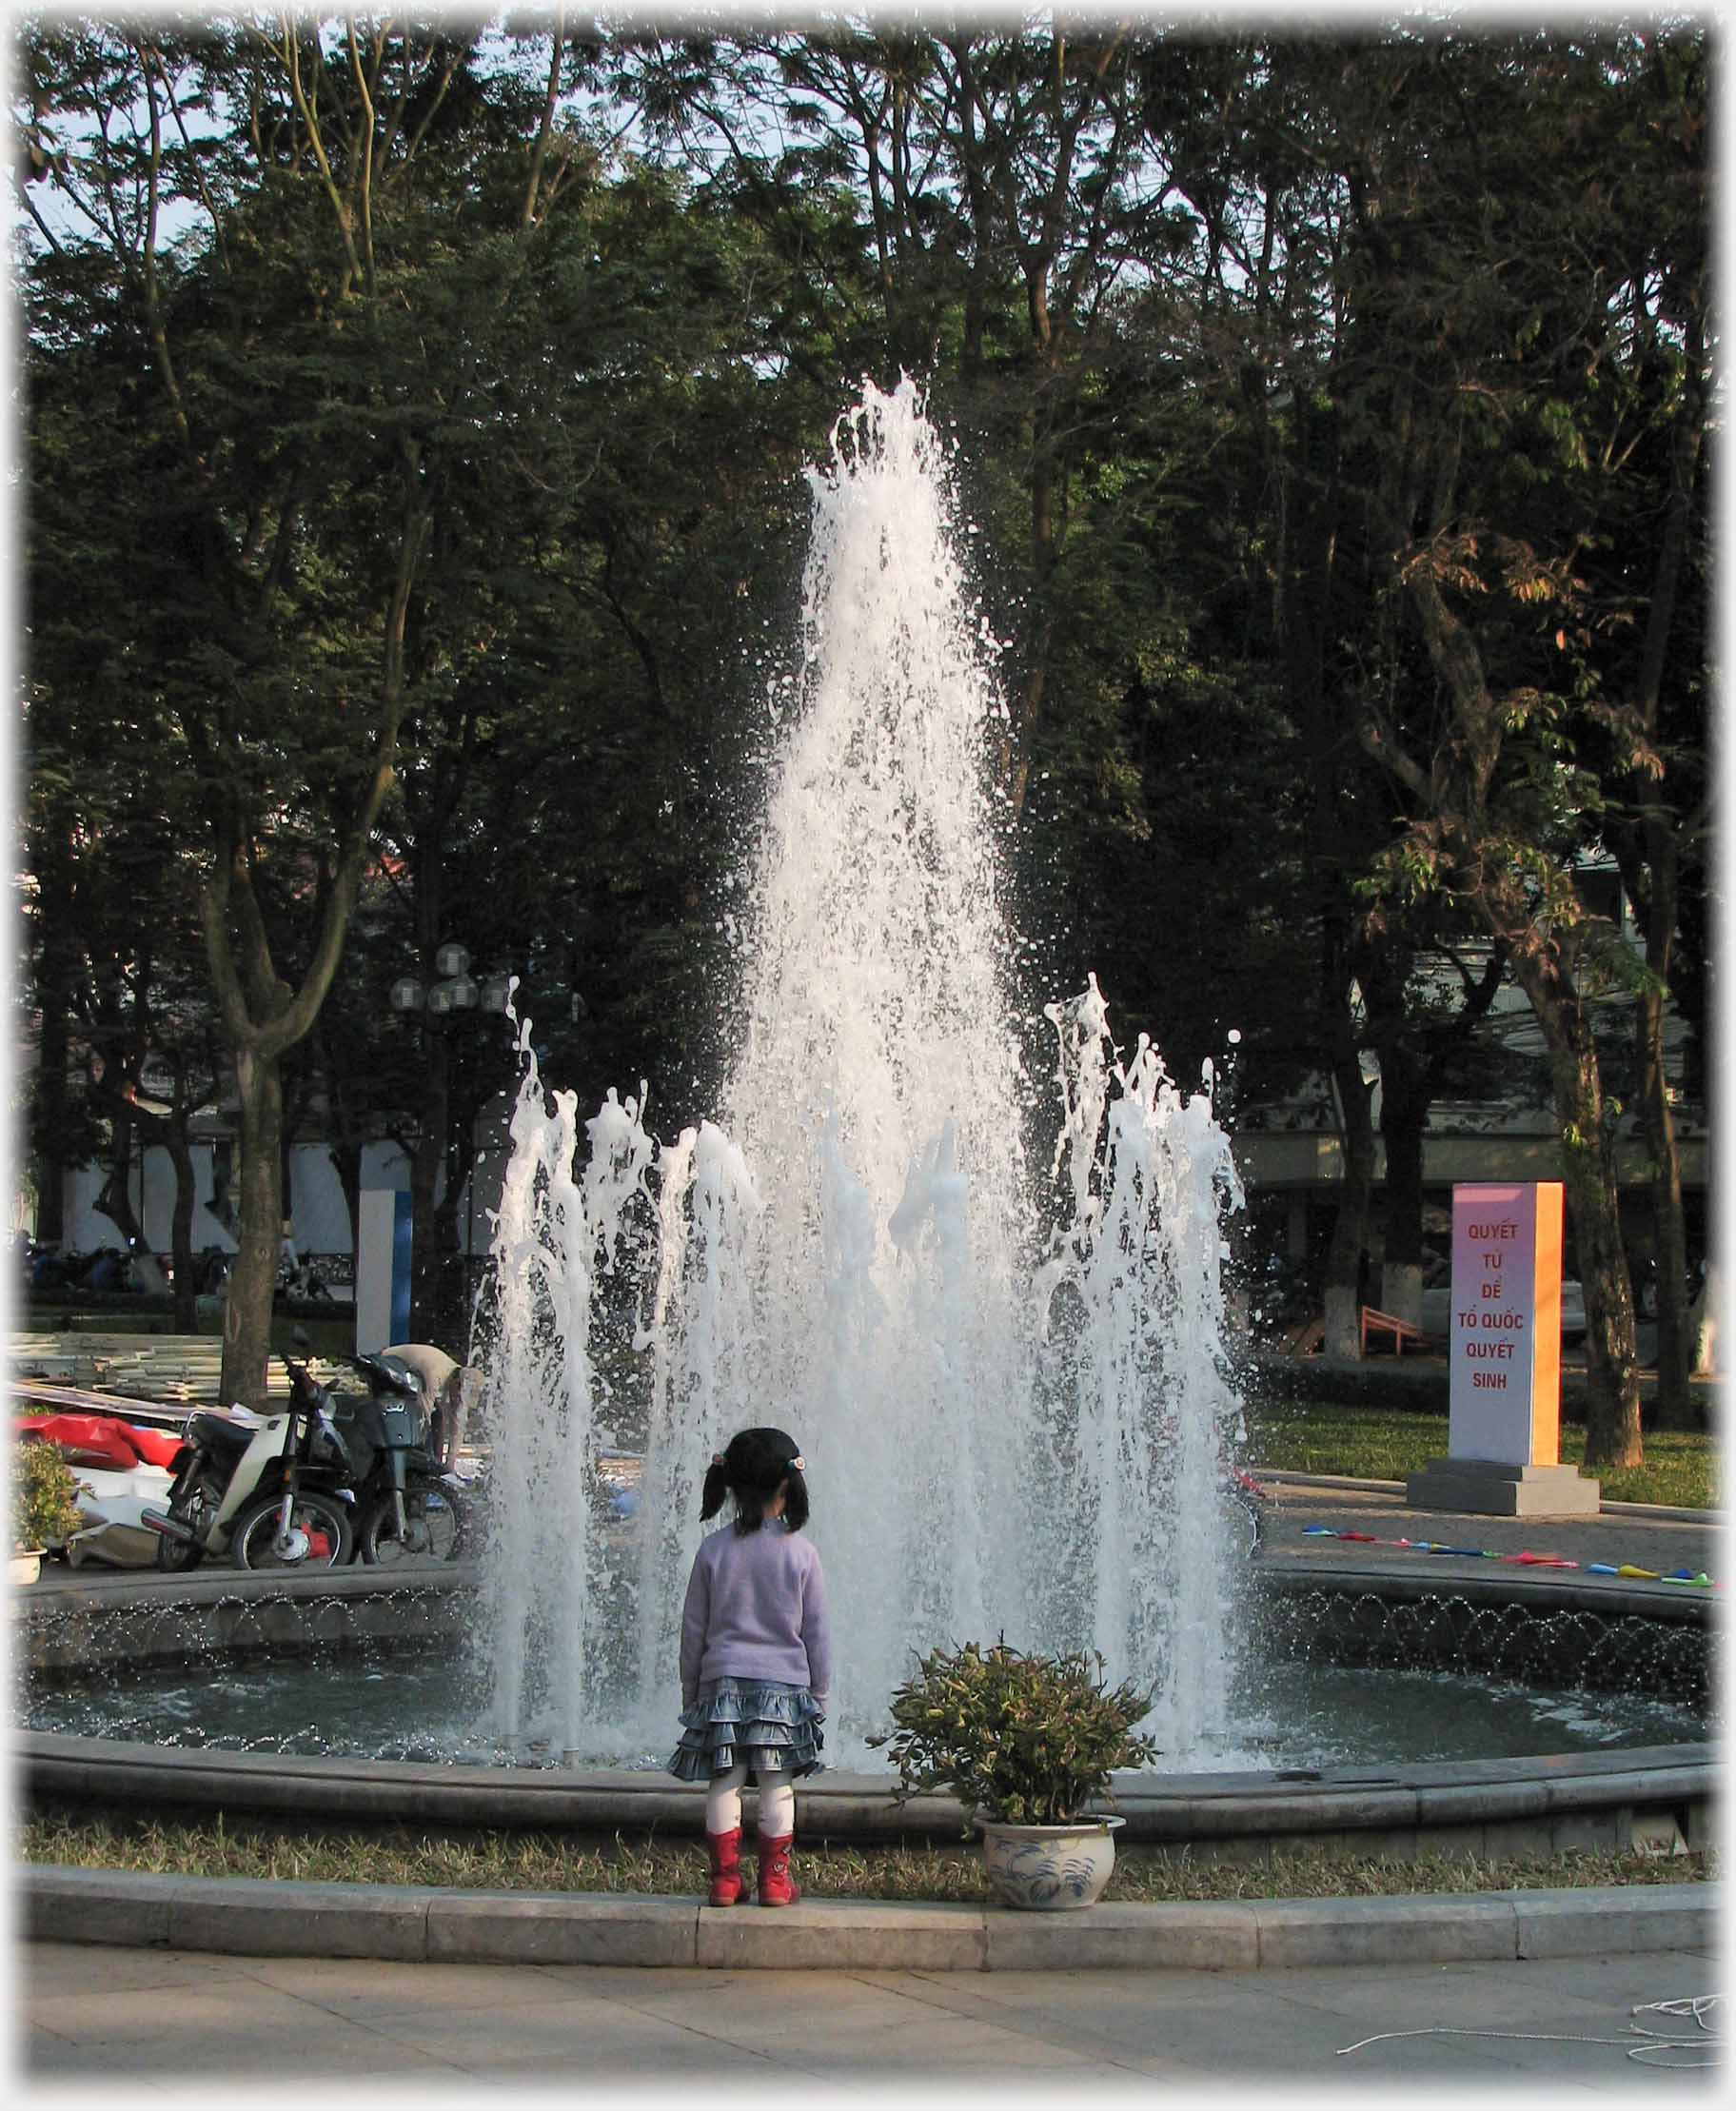 Small girl in front of fountain in evening light.